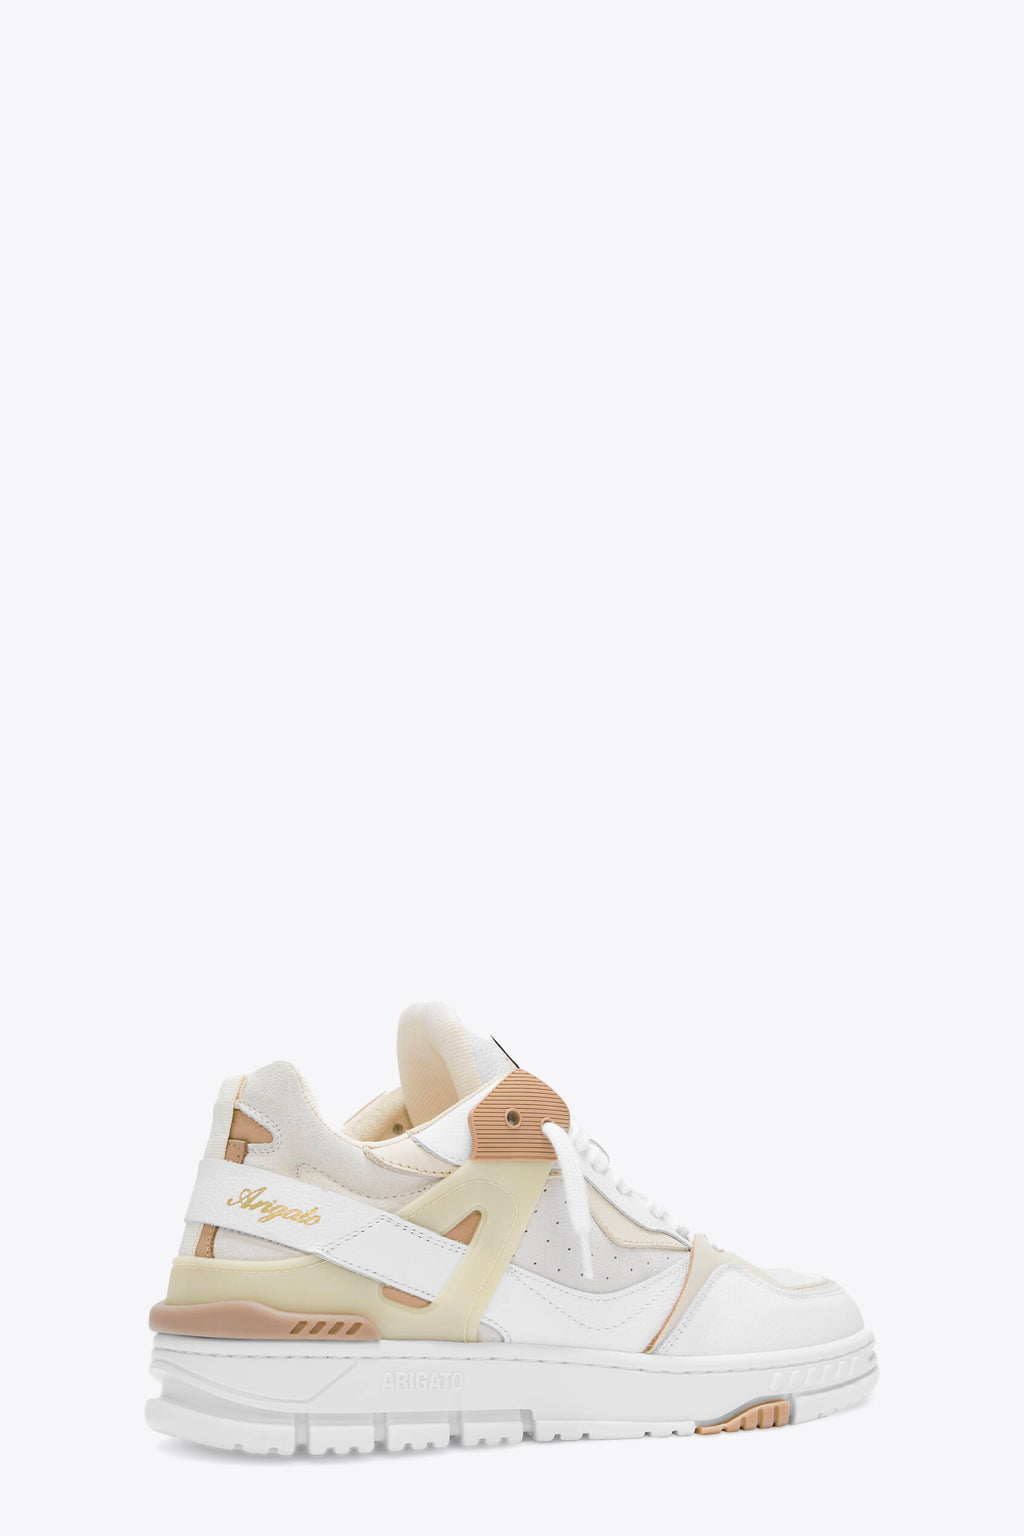 alt-image__White-and-beige-leather-90s-style-low-sneaker---Astro-Sneaker